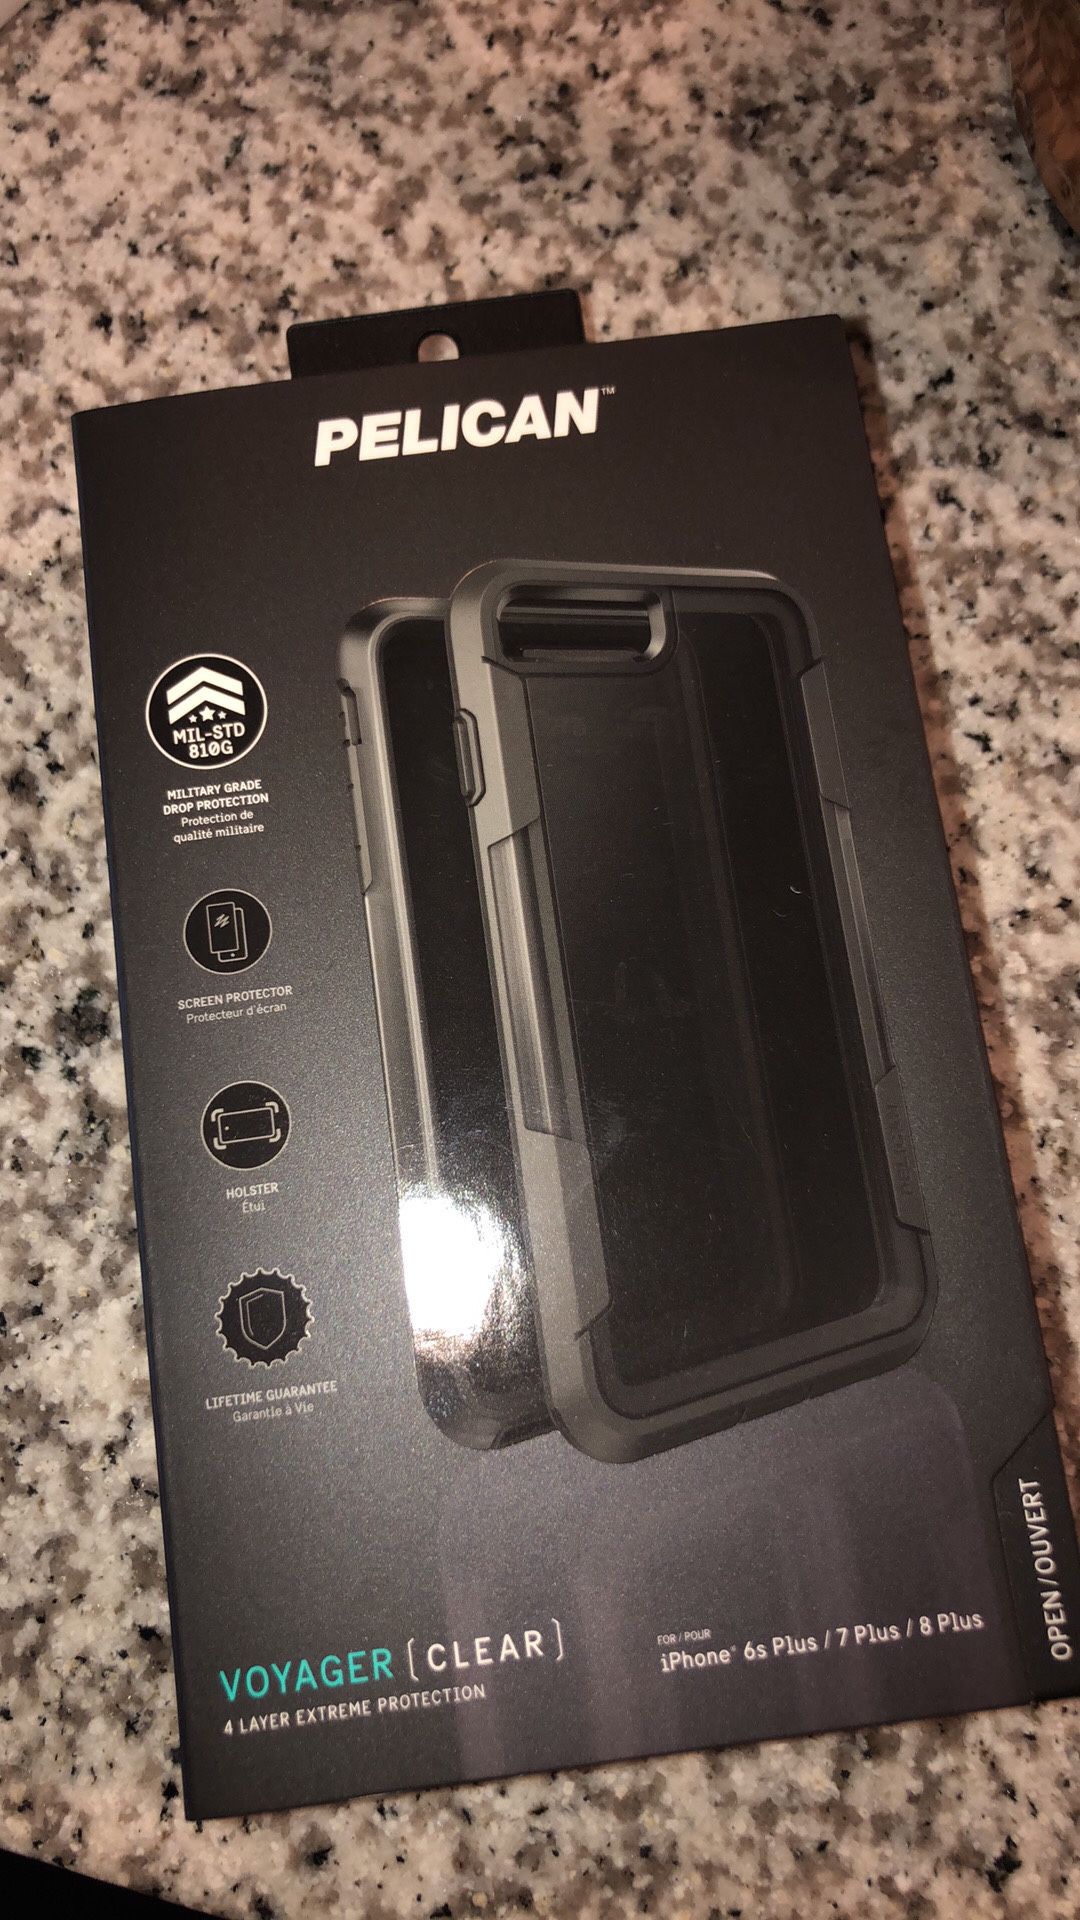 iPhone 8 Plus Case | Pelican Voyager Case with screen protector - fits iPhone 6s/7/8 Plus (Black)